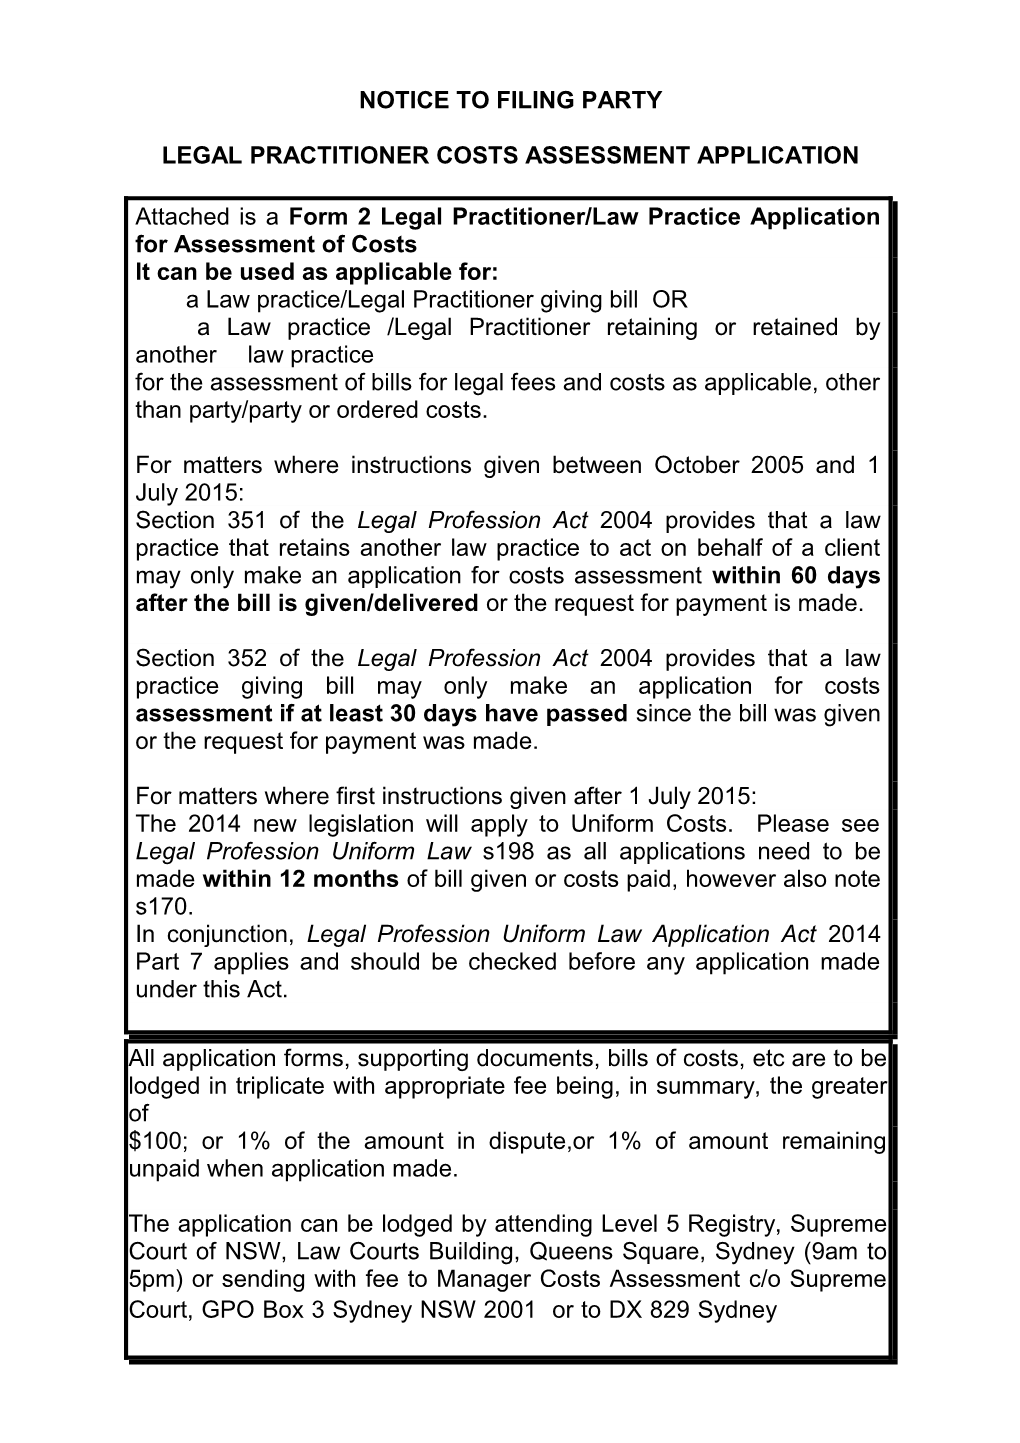 Legal Practitioner Costs Assessment Application